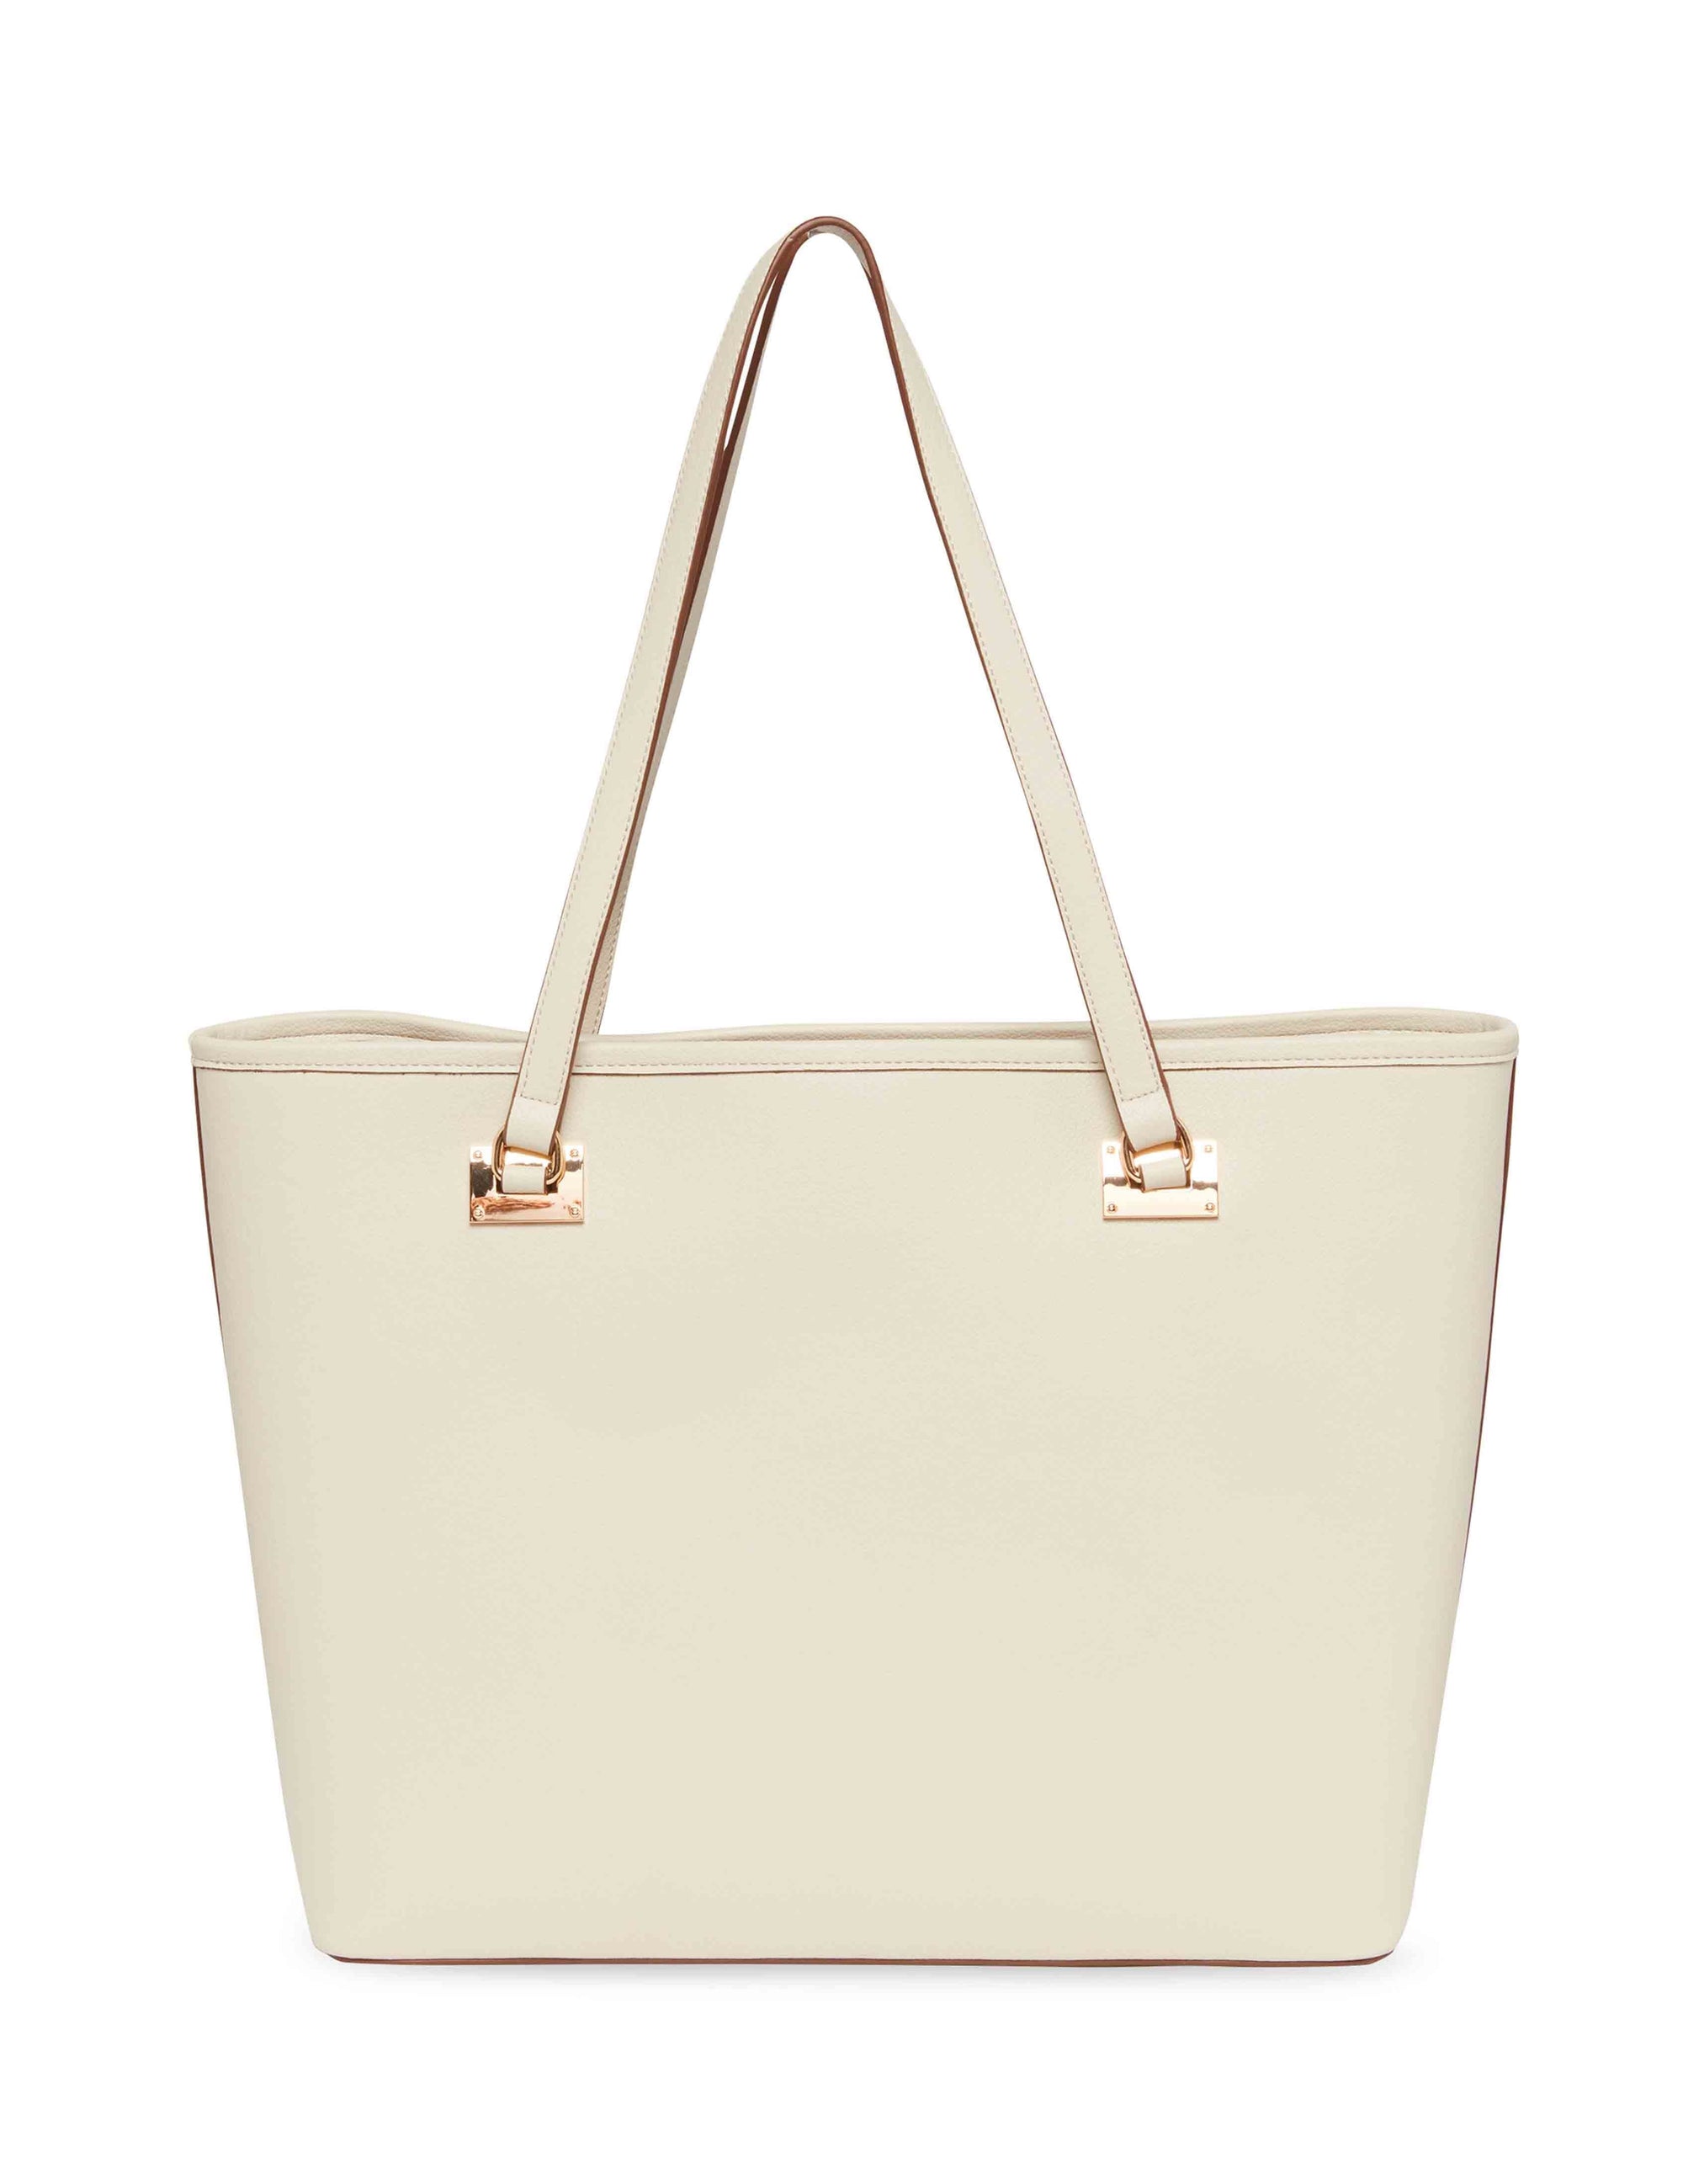 Anne Klein Perforated Tote Bag in Natural | Lyst